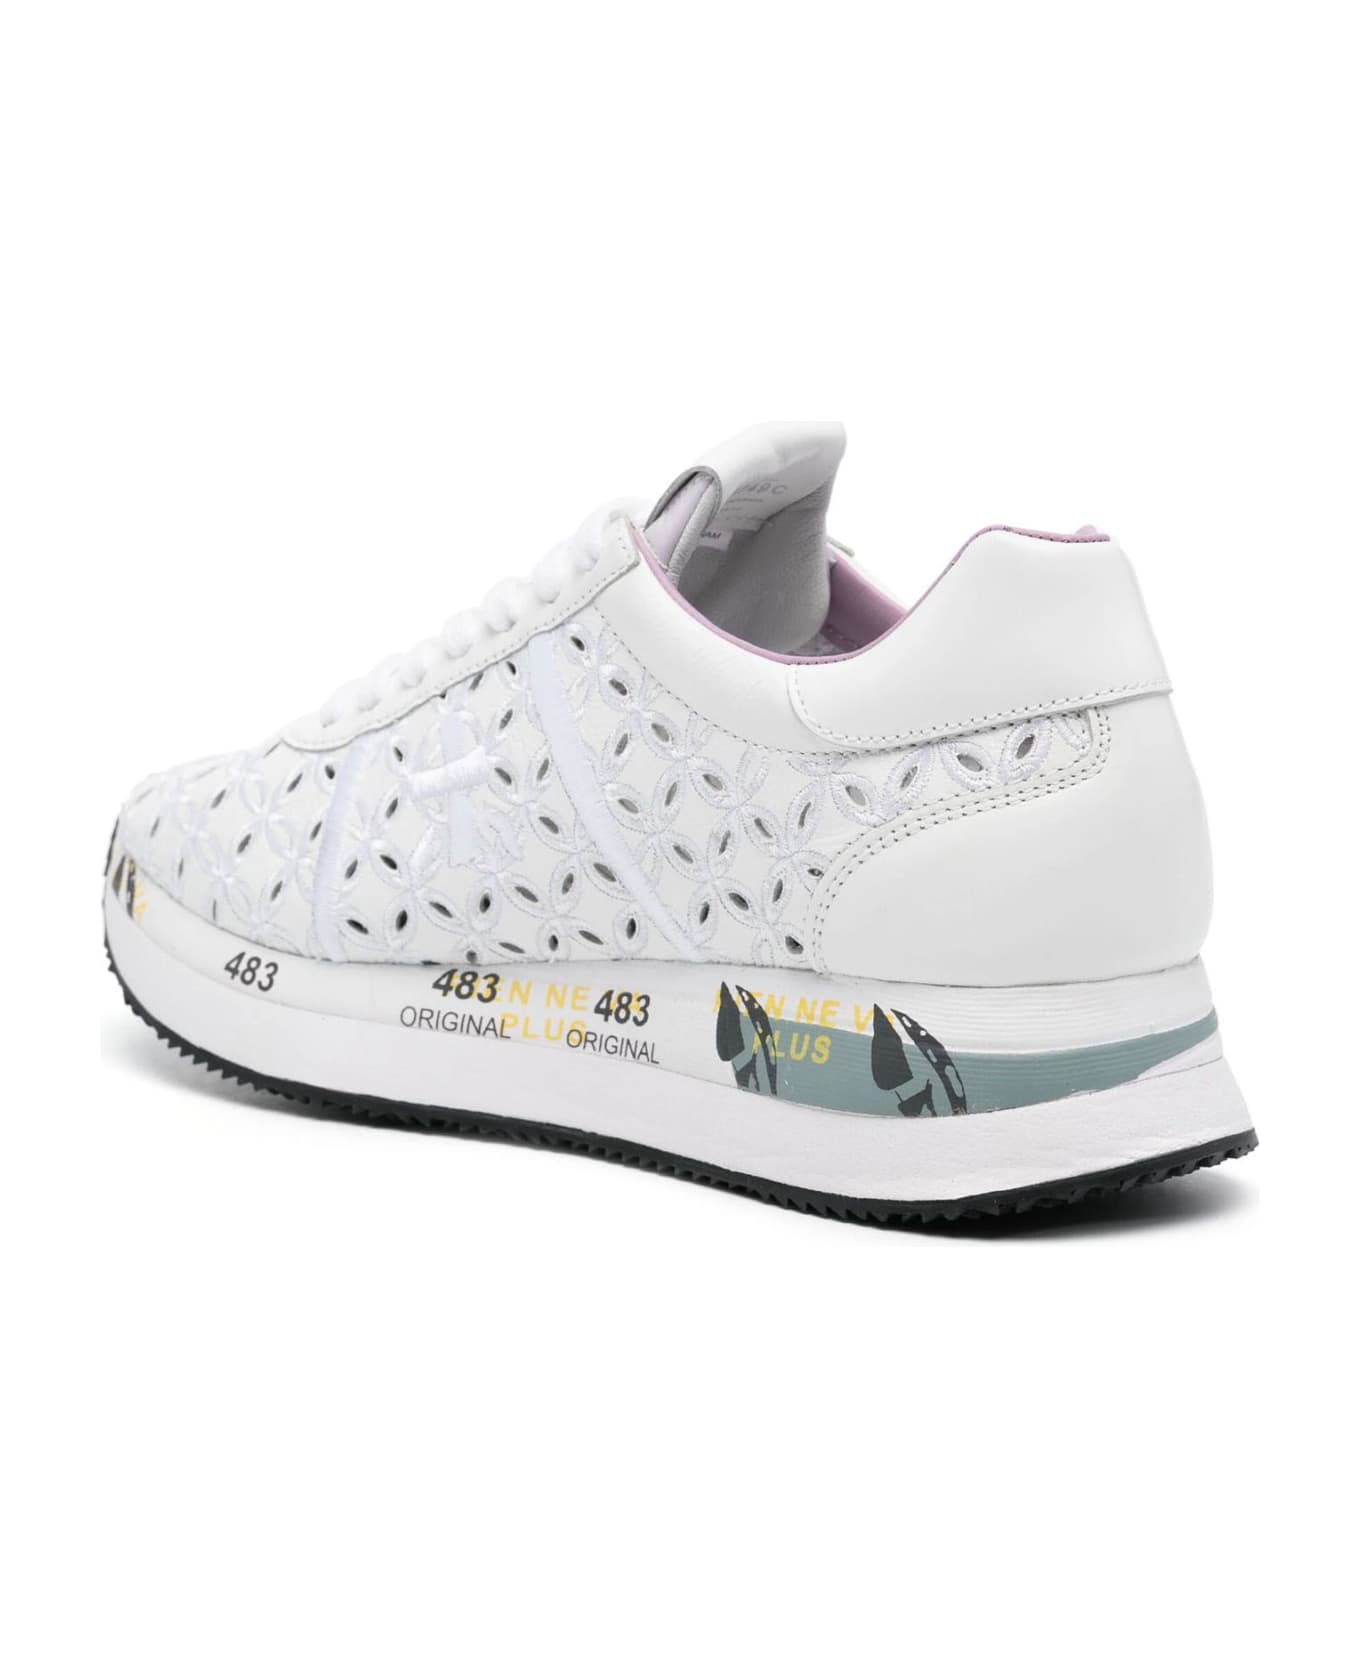 Premiata Conny Broderie-anglaise Sneakers - Bianco/nero